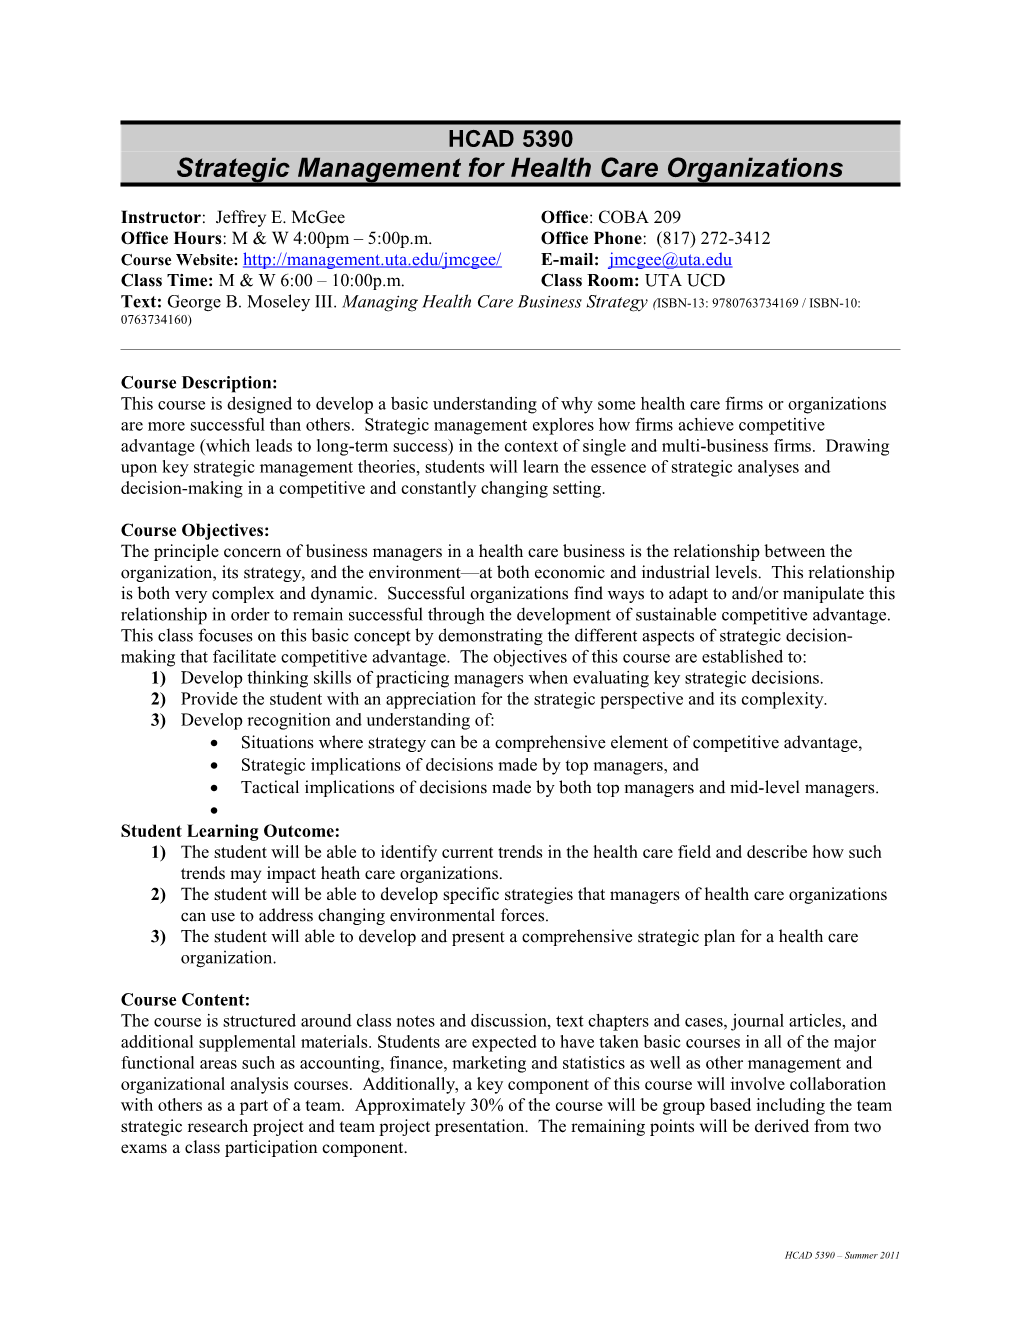 Strategic Management for Health Care Organizations